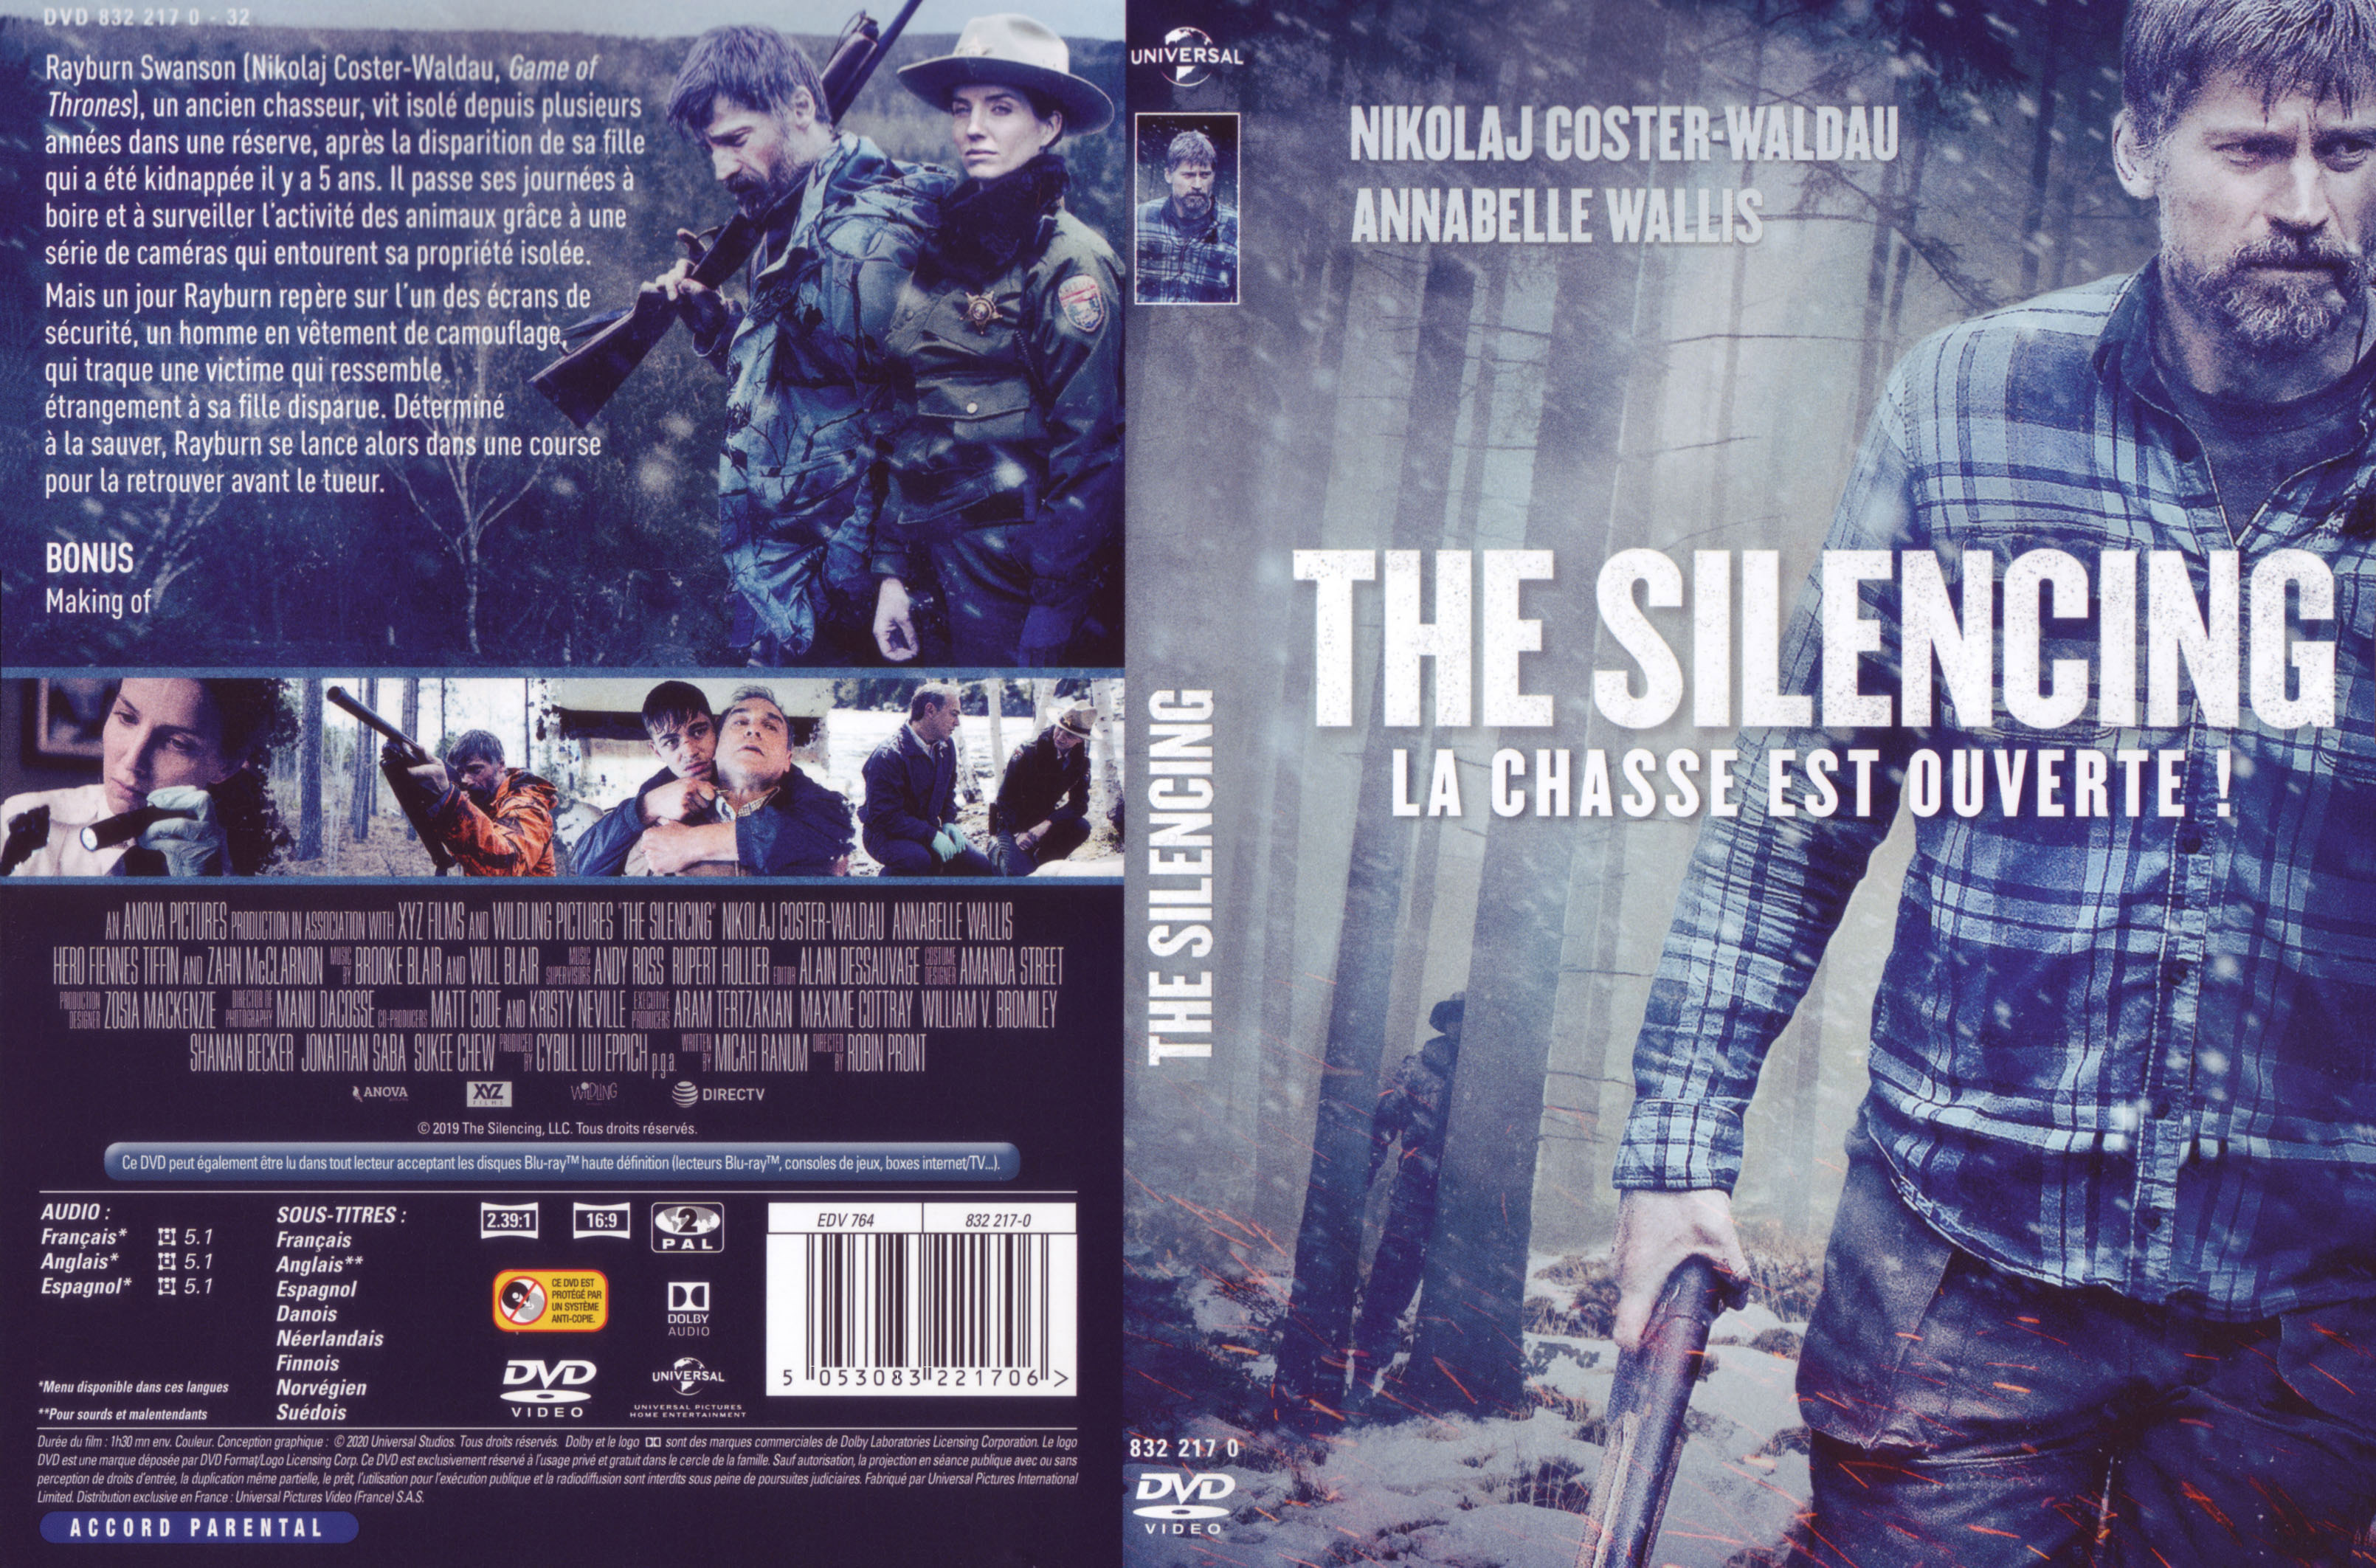 Jaquette DVD The silencing